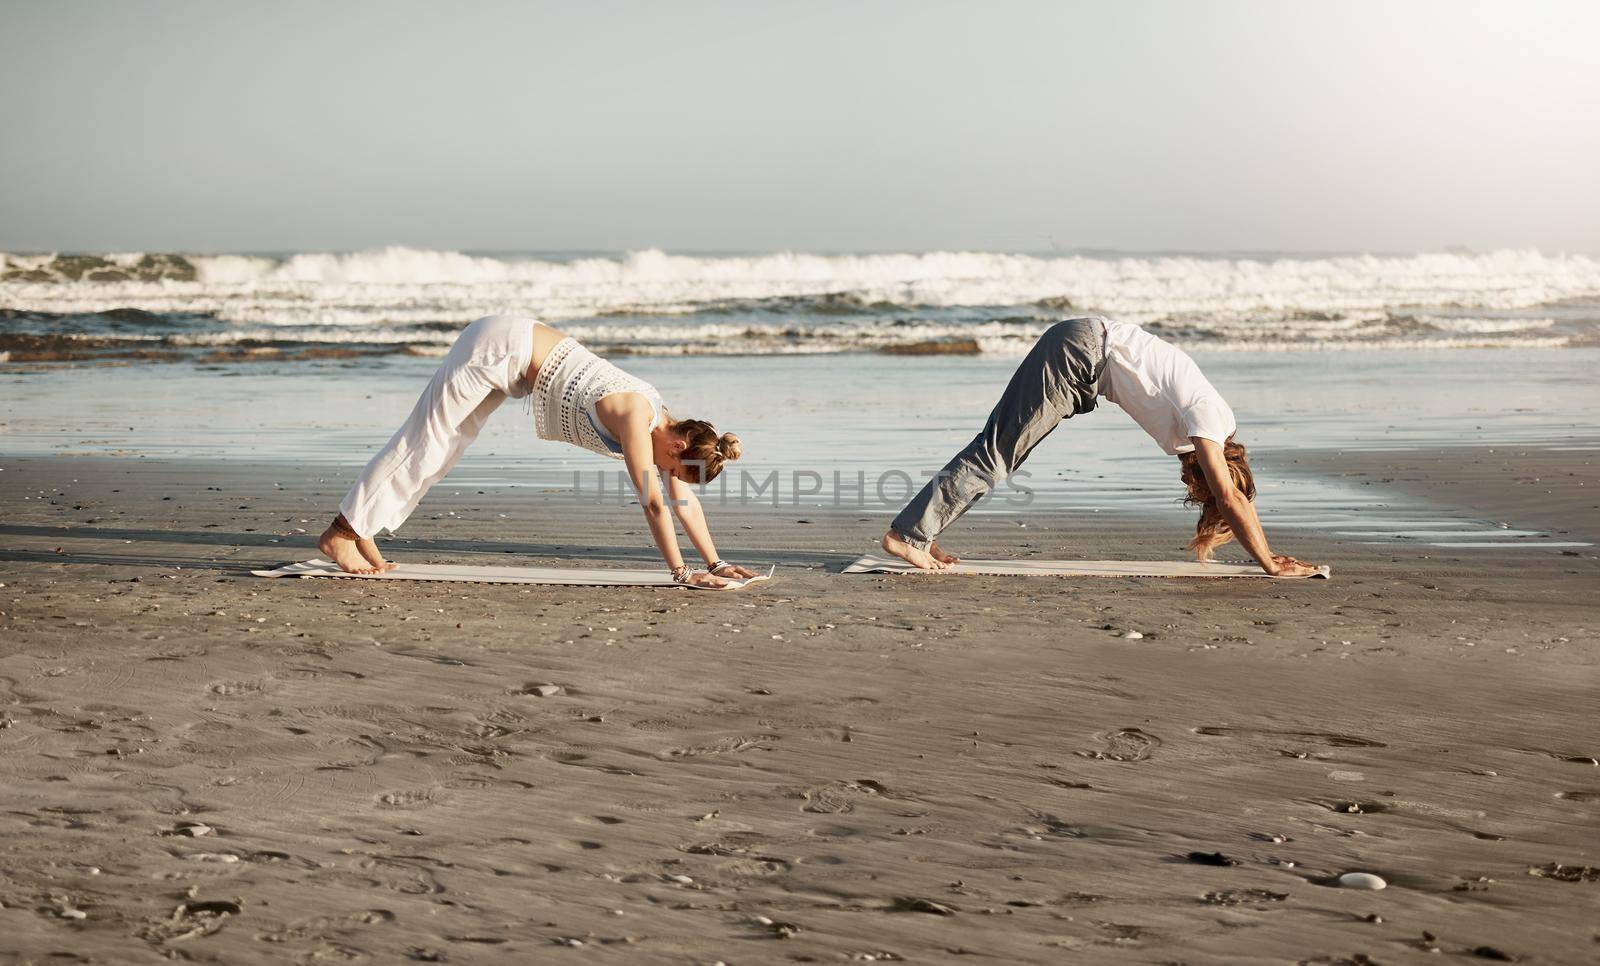 It is through yoga we gain strength and find peace. a young couple practising yoga together on the beach